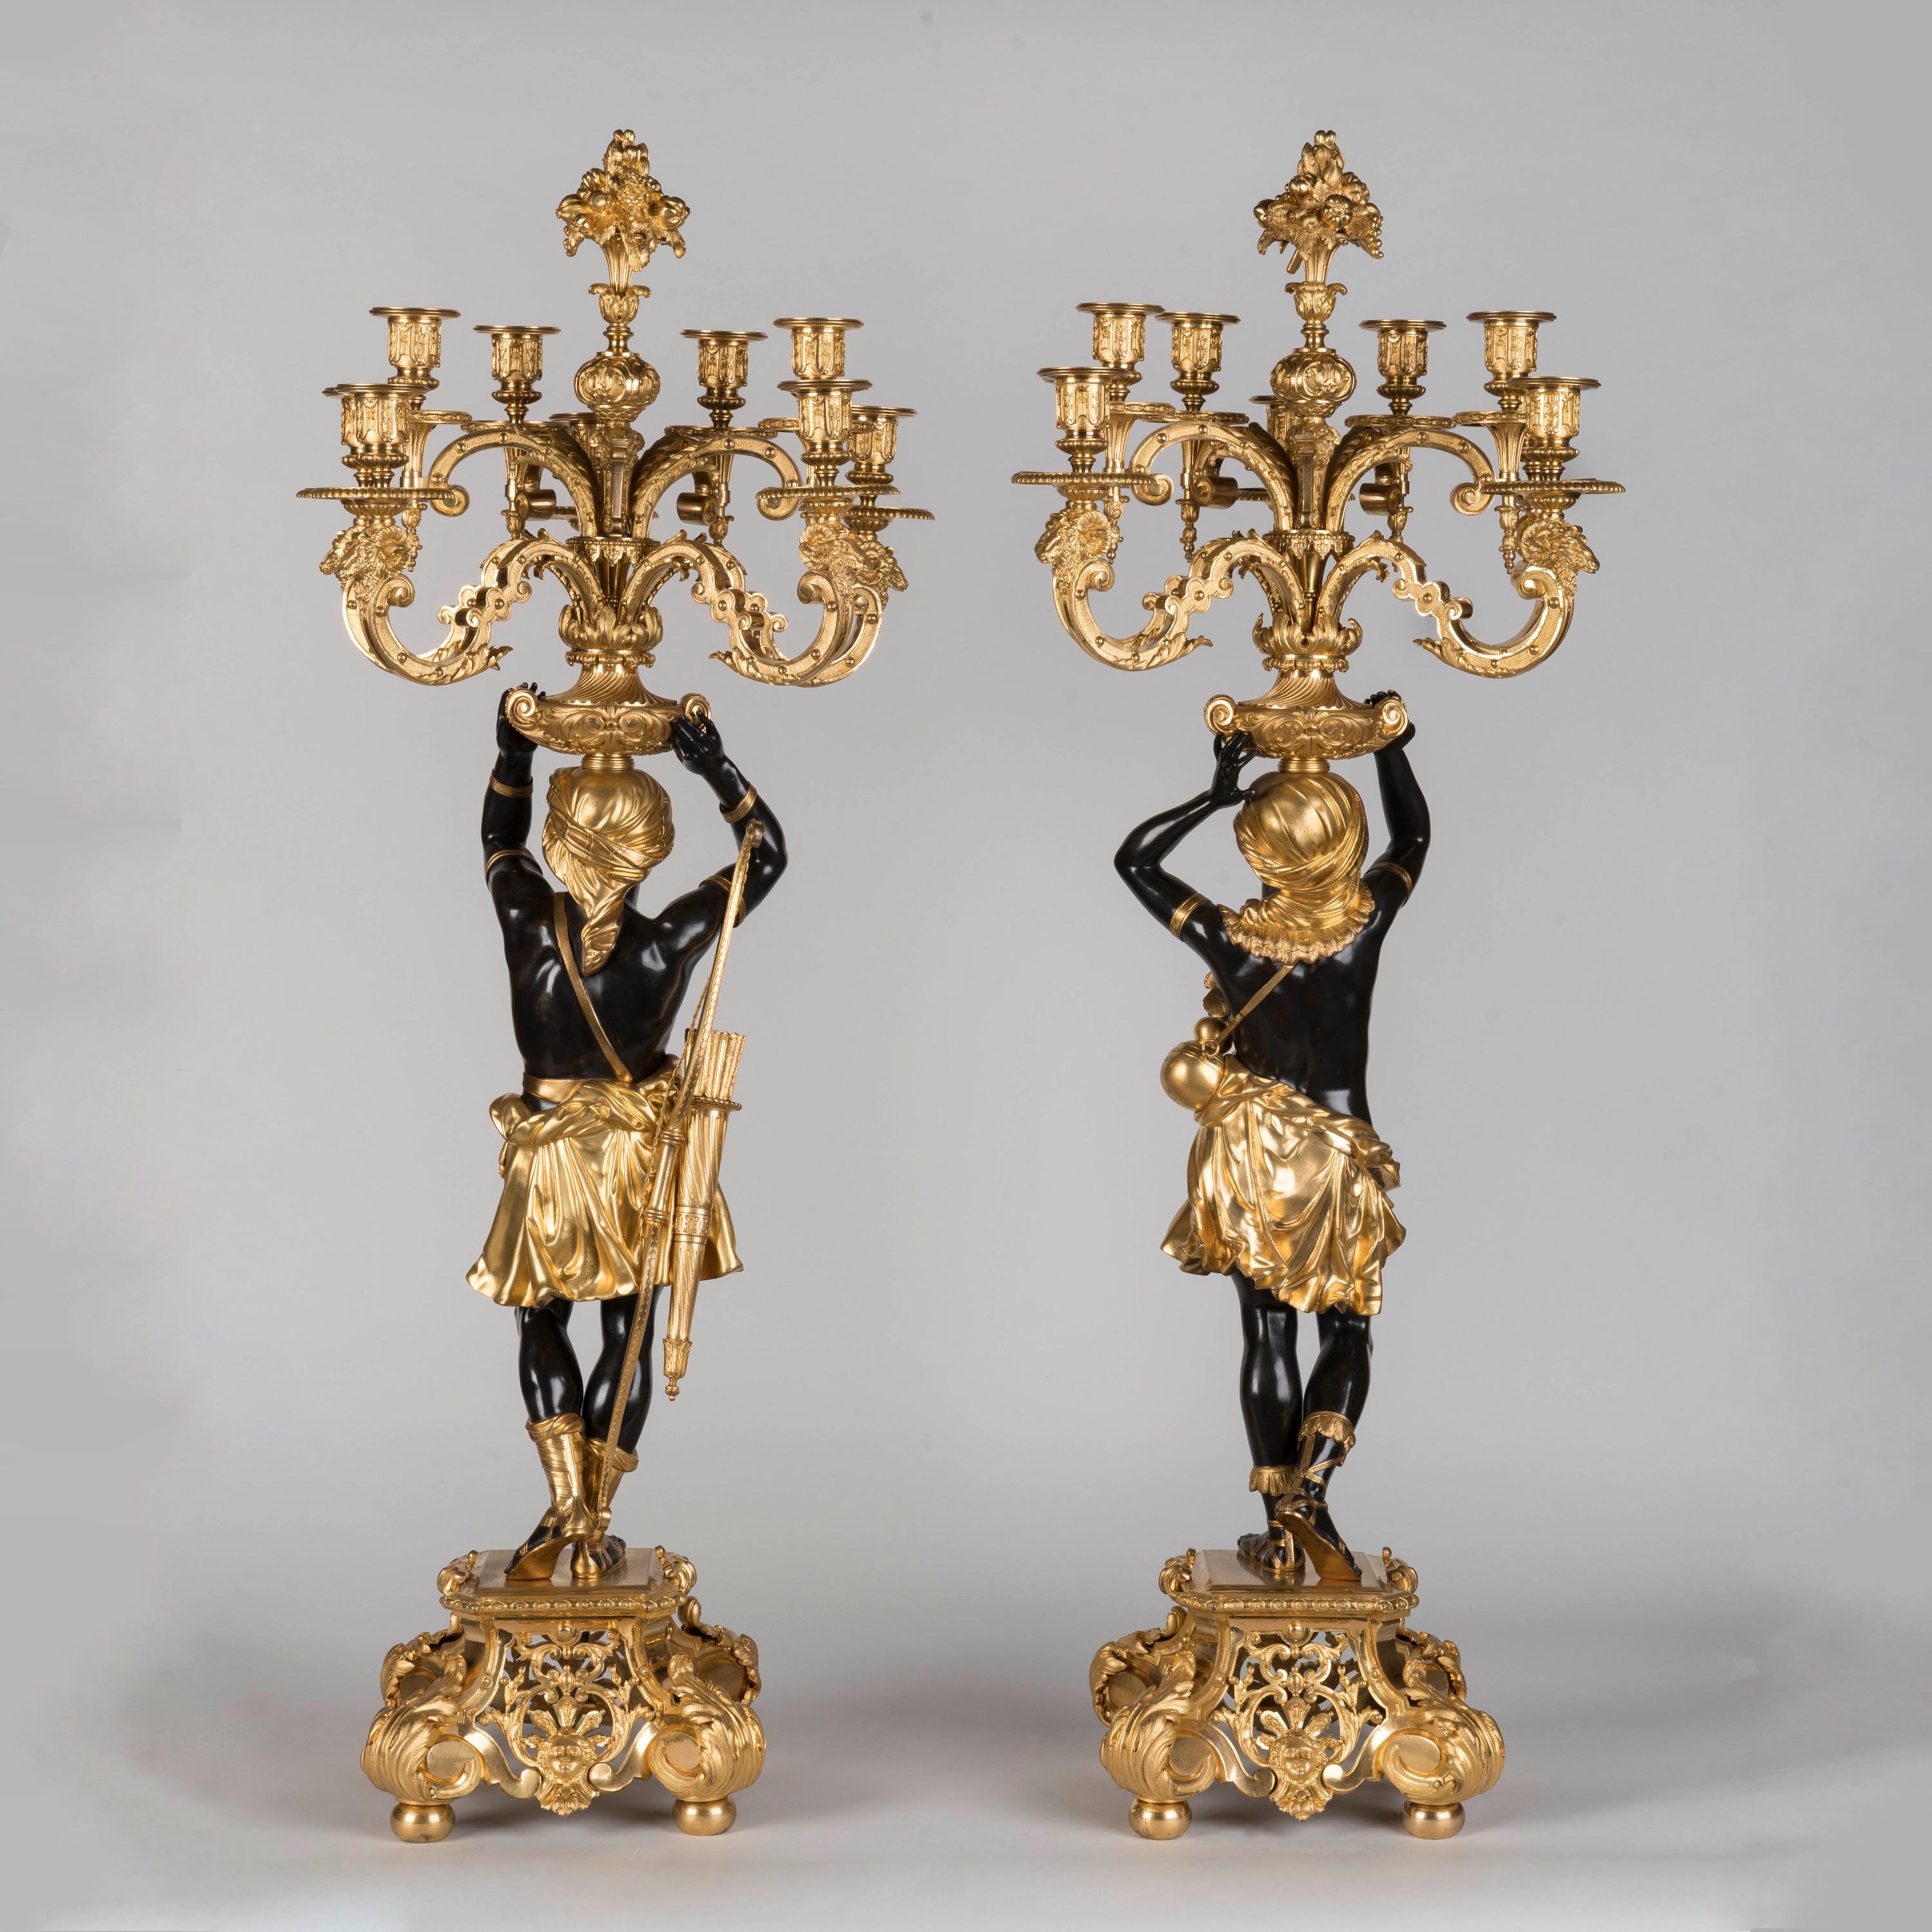 French Pair of Large 19th Century Bronze and Gilded Figural Candelabra by Denière For Sale